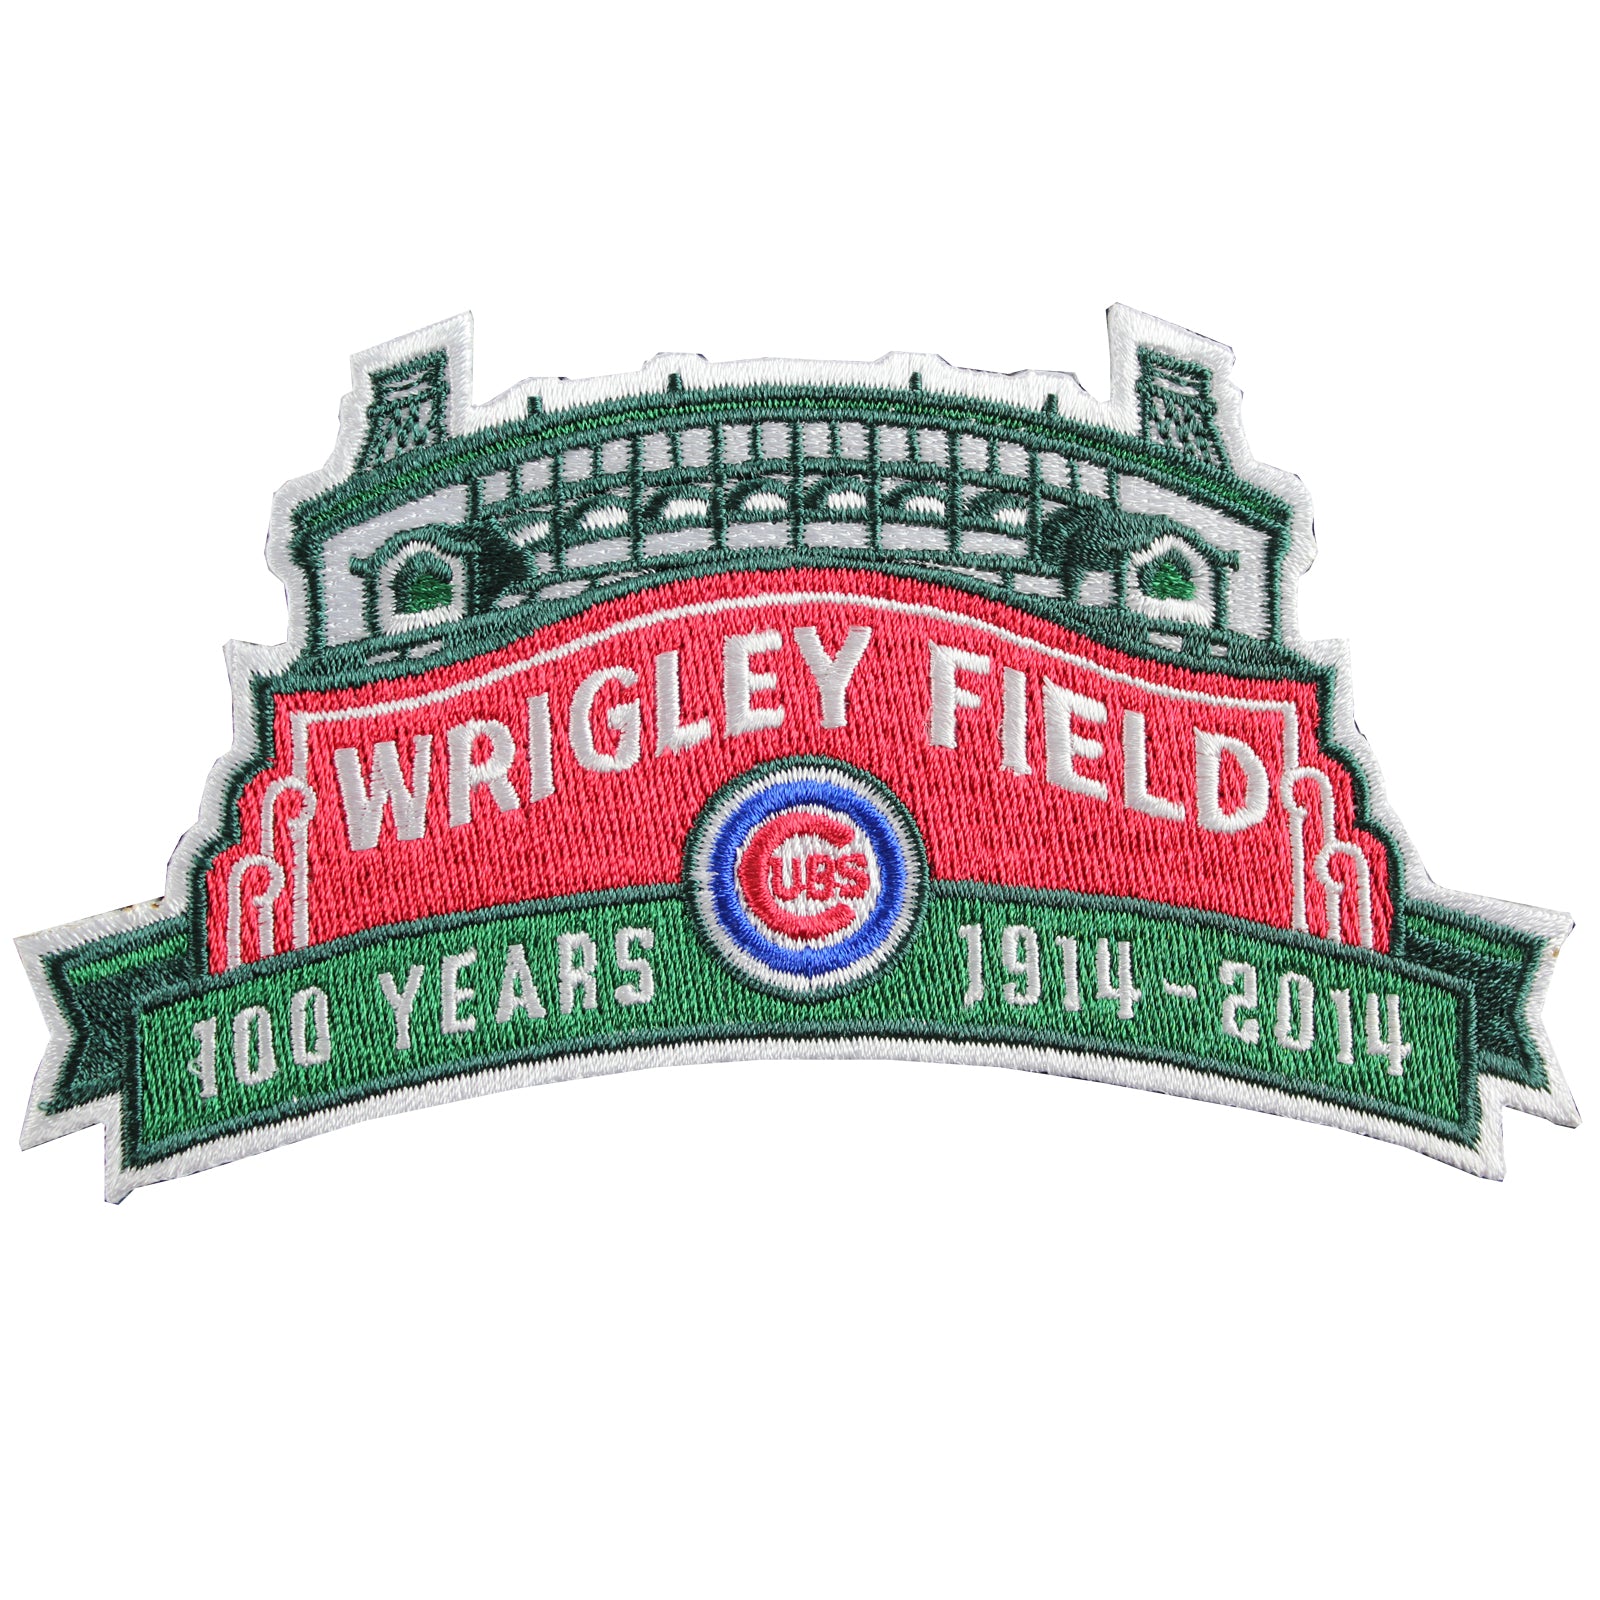 2014 Cubs jersey with 100 year Wrigley patch! #Chicagocubs